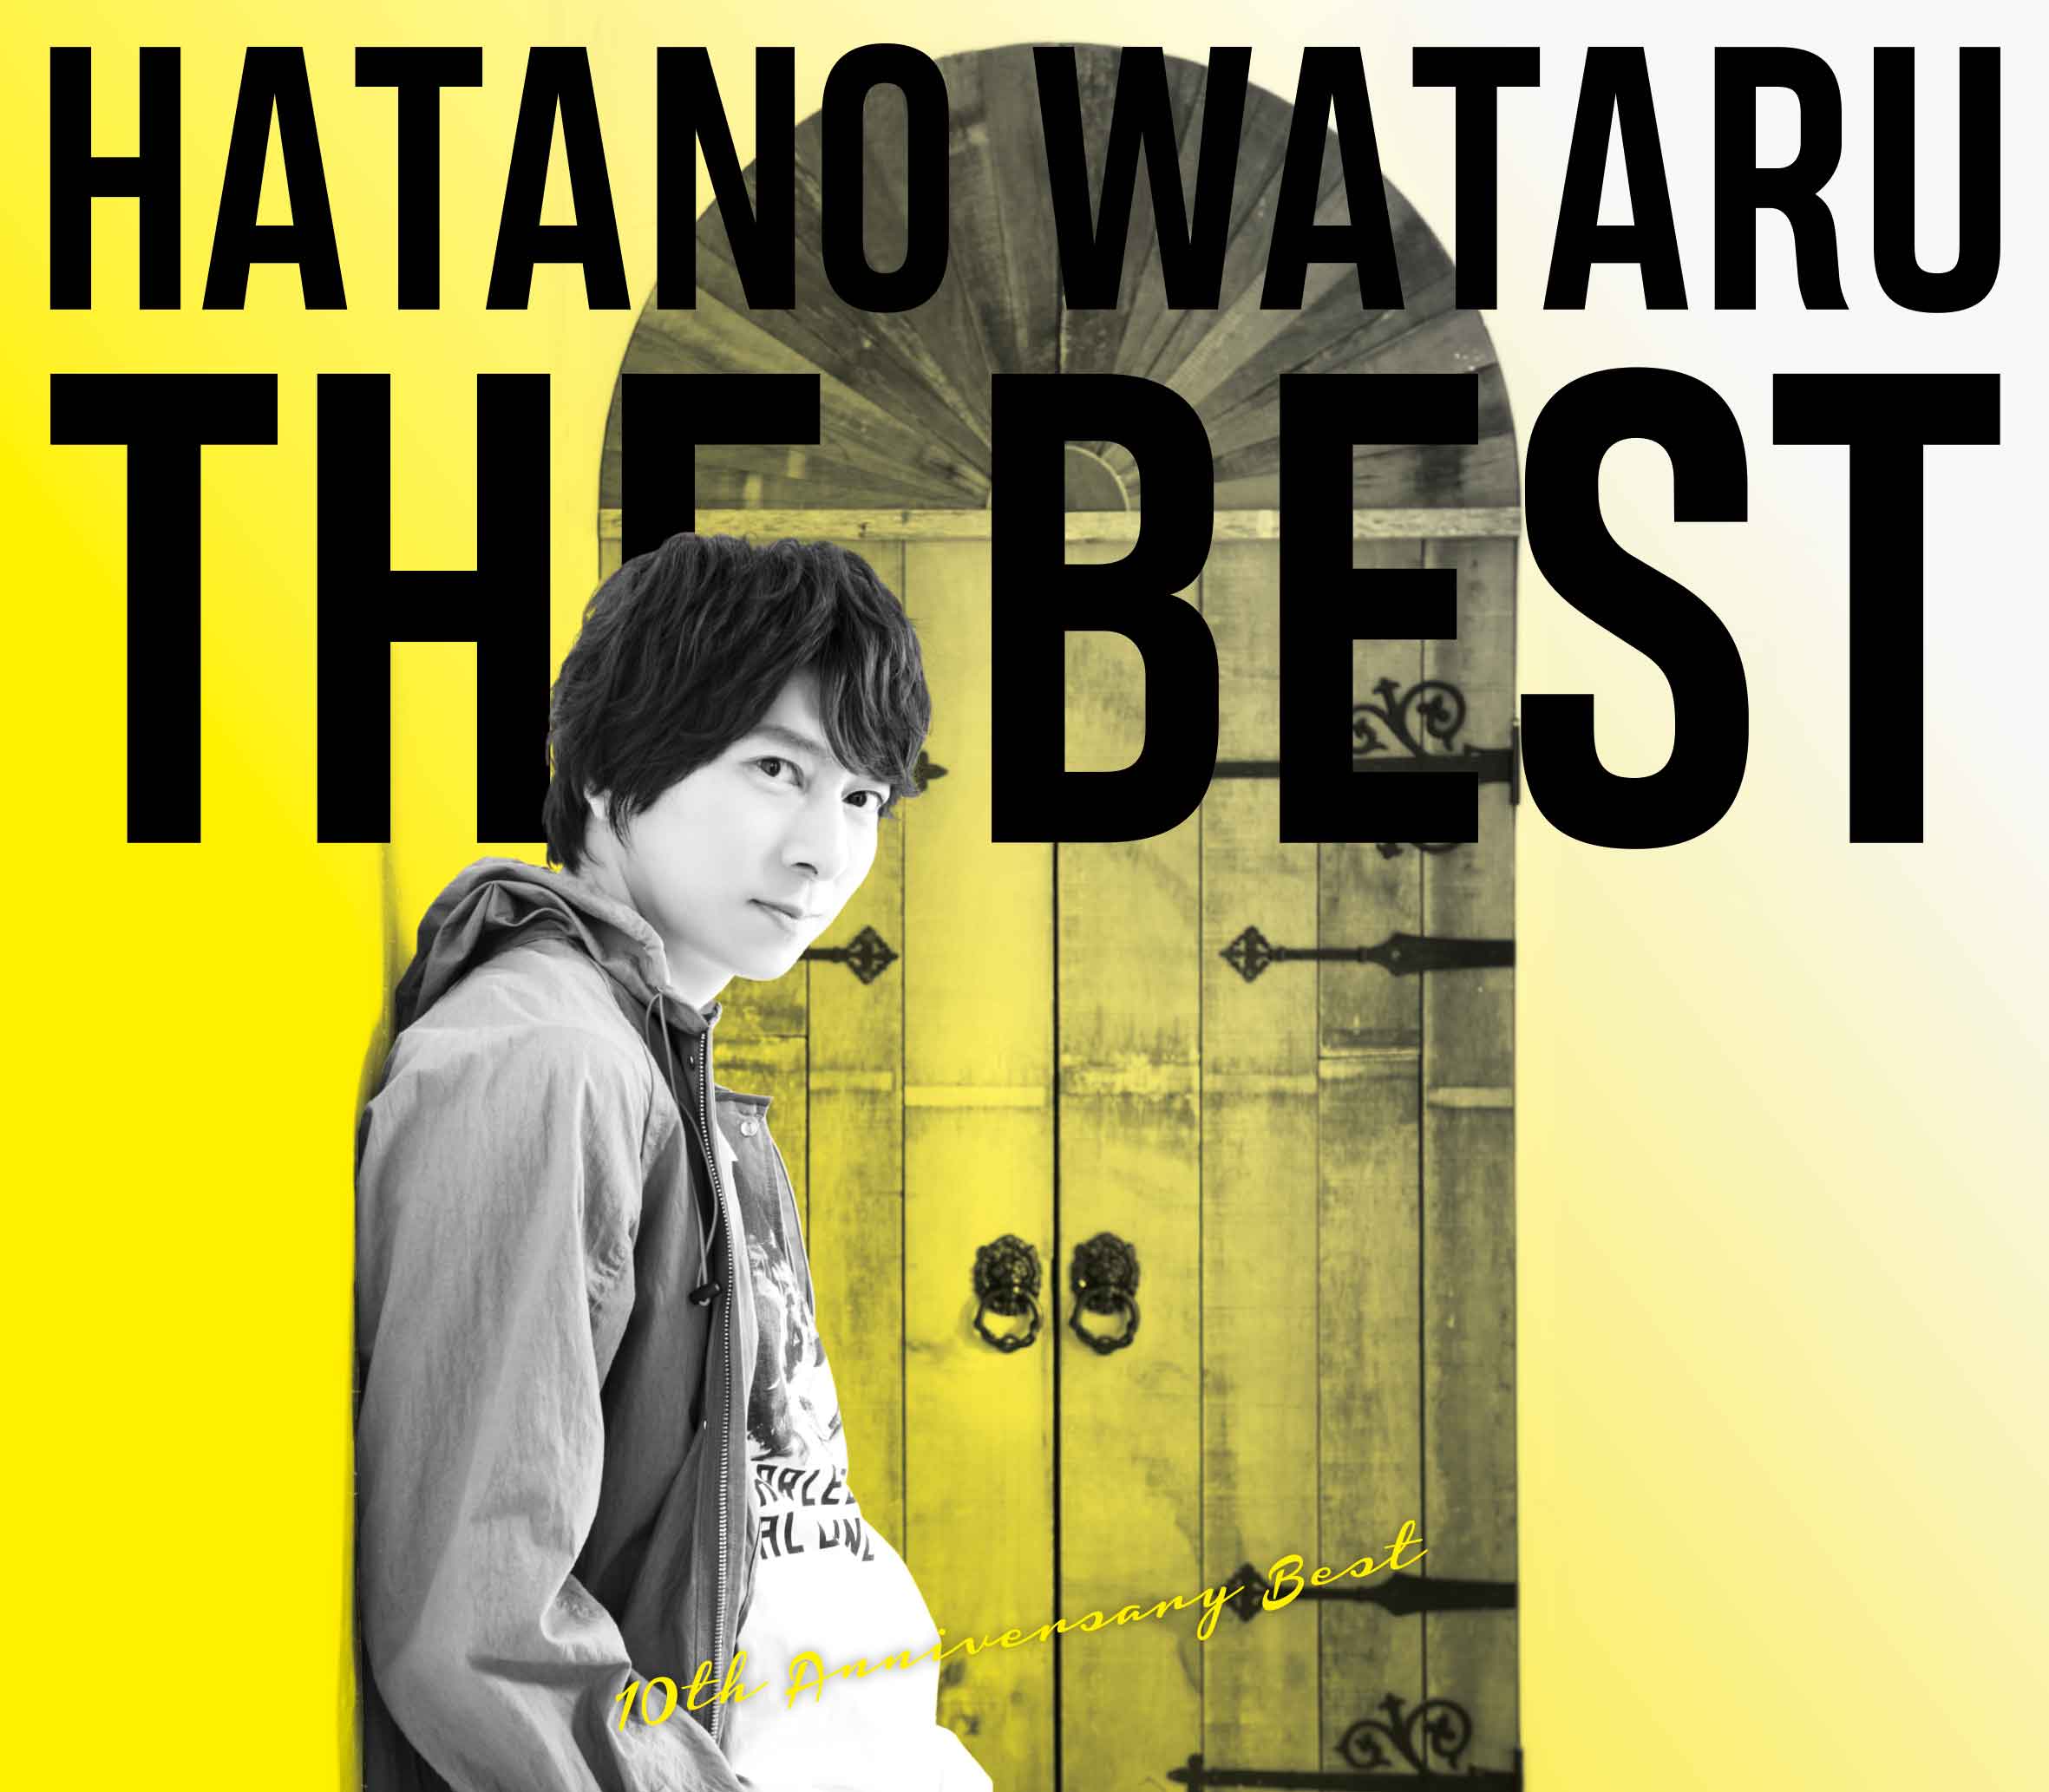 HATANO WATARU THE BEST」 - DISCOGRAPHY | 羽多野渉 OFFICIAL SITE